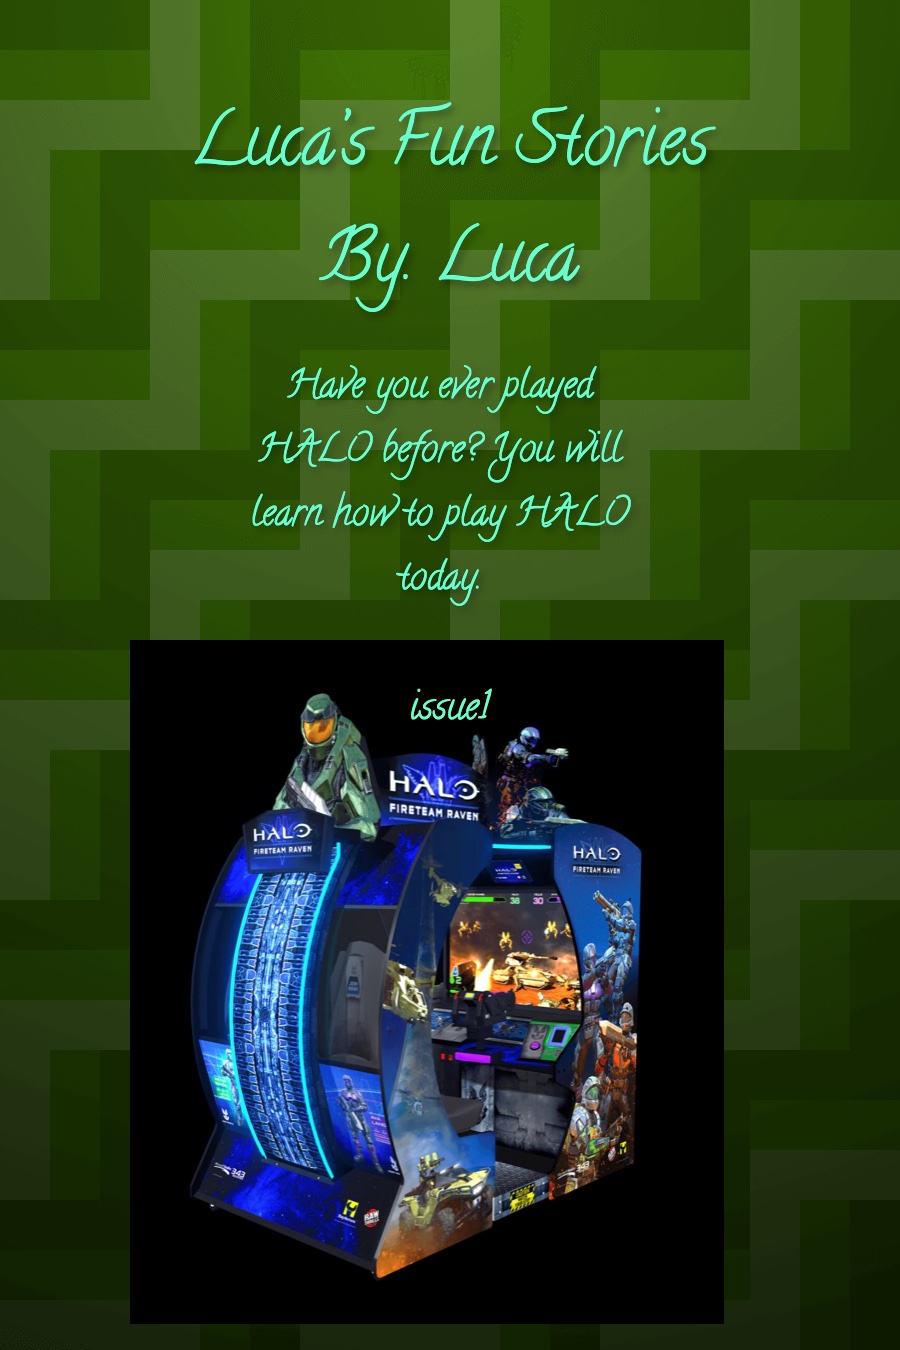 Luca’s Fun Stories by Luca S